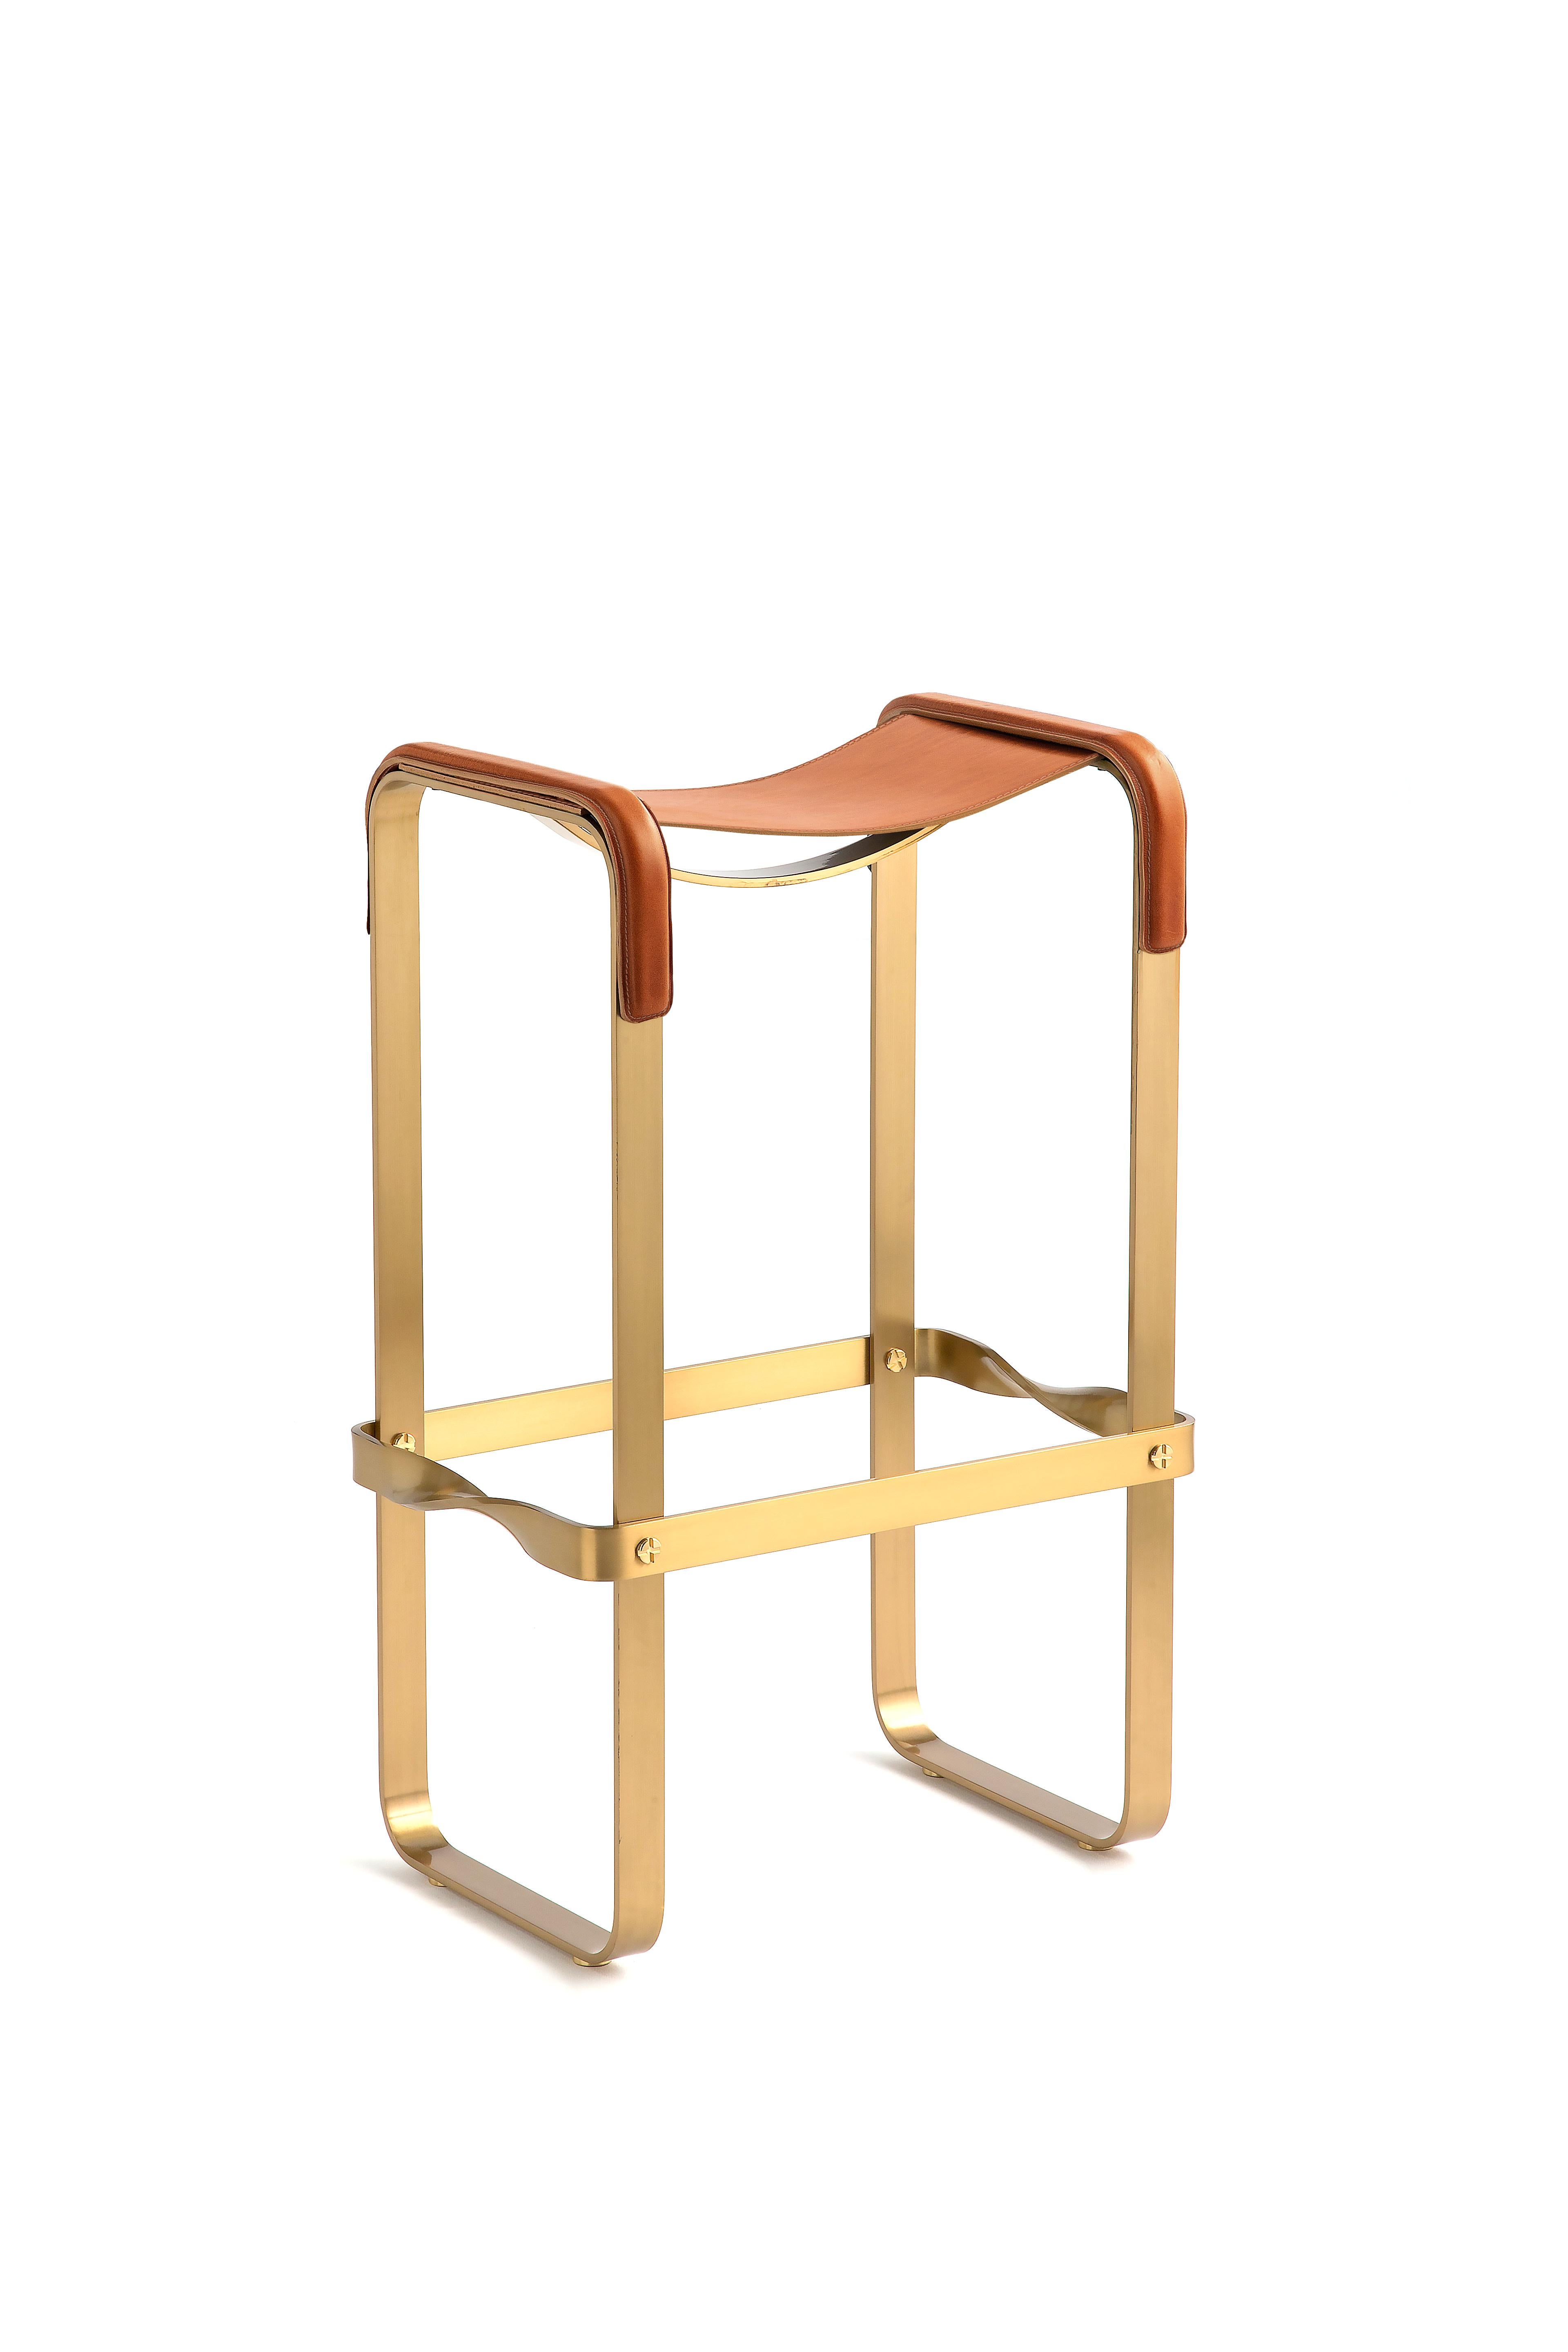 The Wanderlust contemporary barstool belongs to a collection of Minimalist and serene pieces where exclusivity and precision are shown in small details such as the hand-turned metal nuts and bolts that fix the leather surfaces, that go unnoticed at